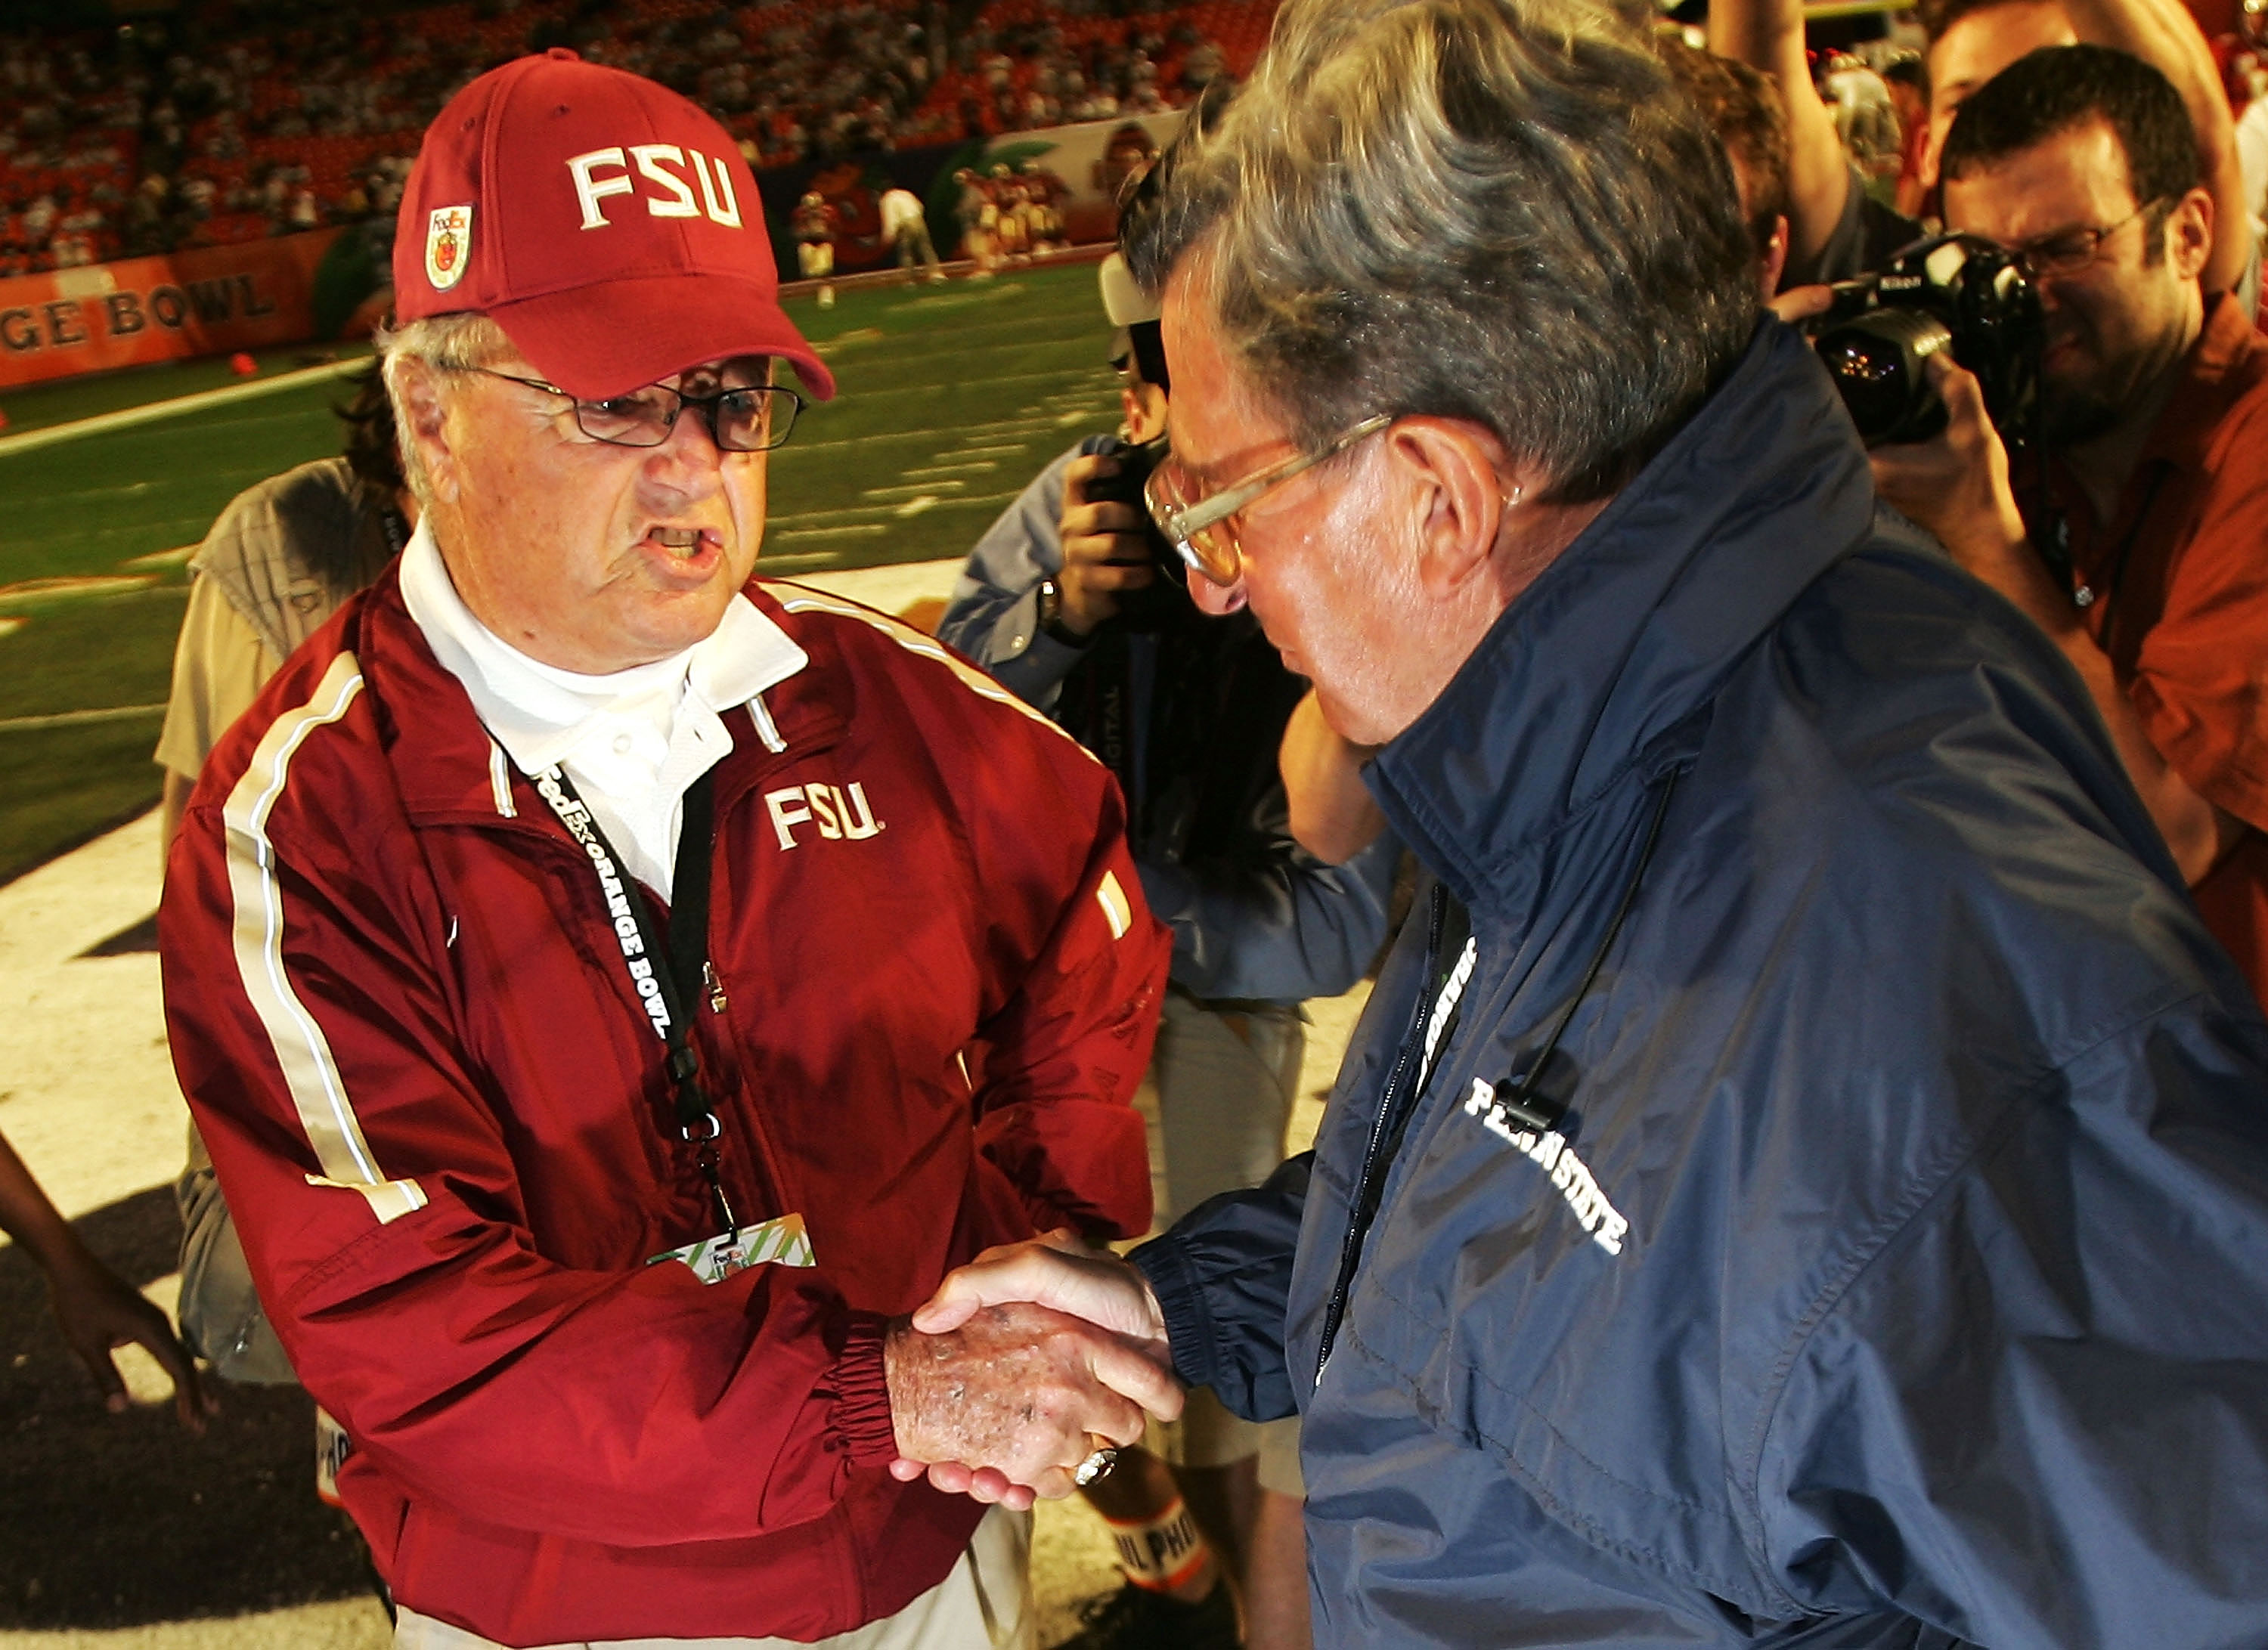 MIAMI - JANUARY 3:  Head Coach Joe Paterno (R) of the Penn State Nittany Lions and Head Coach Bobby Bowden of the Florida State Seminoles shake hands before the FedEx Orange Bowl on January 3, 2006 at Dolphins Stadium in Miami, Florida.  (Photo by Al Bell